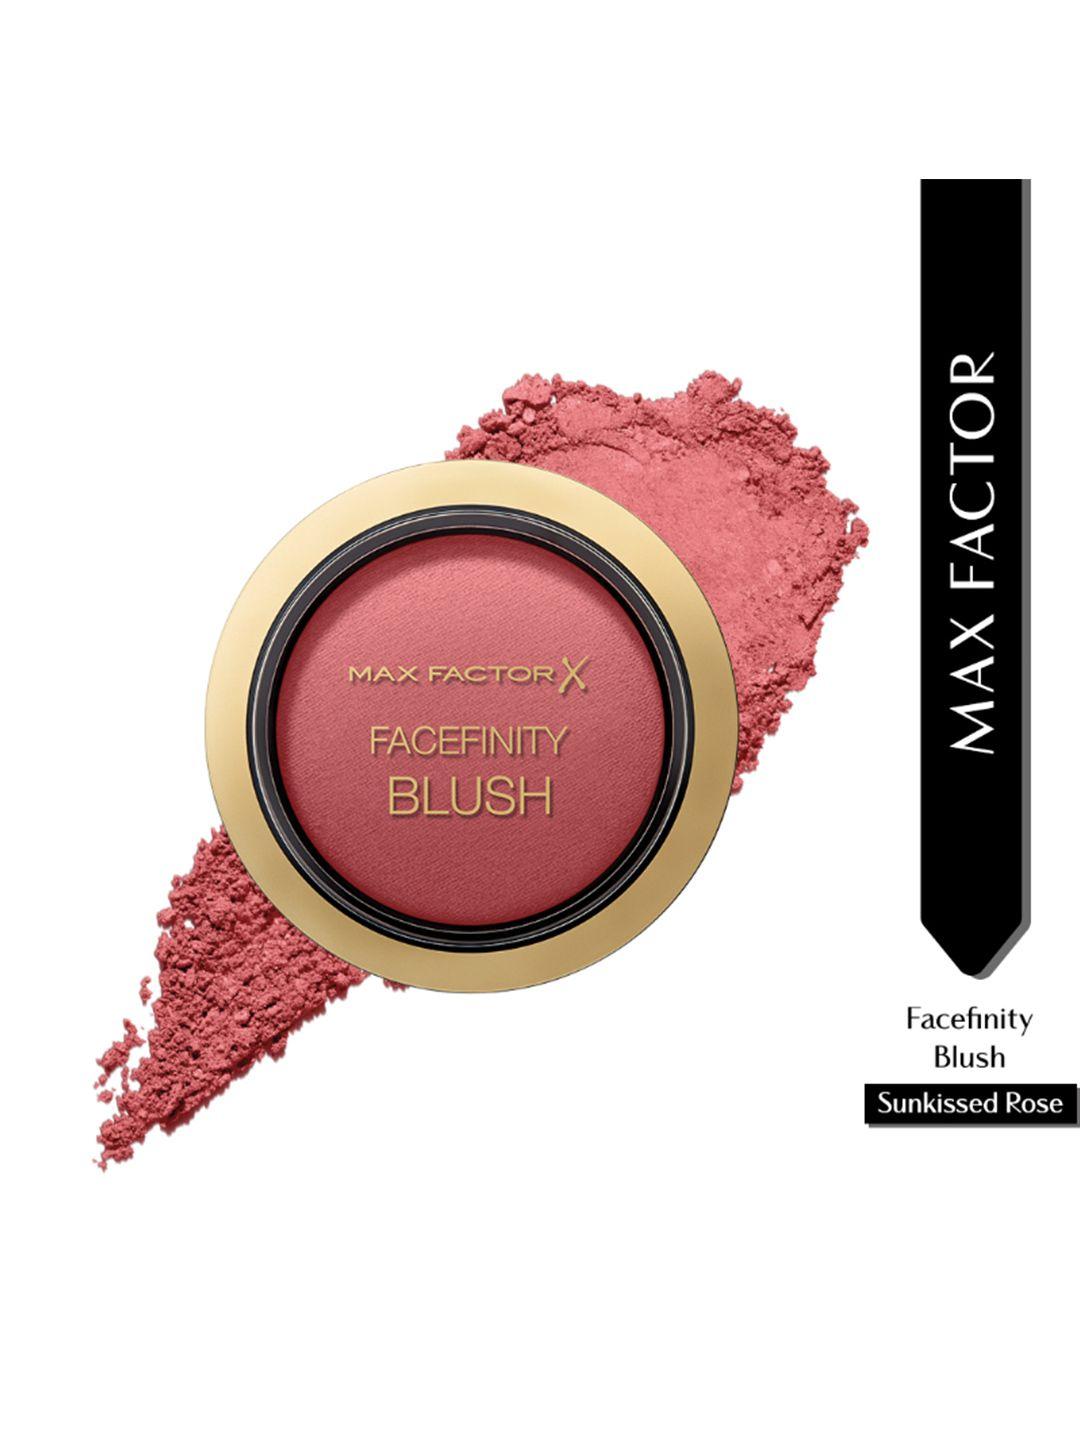 max factor highly-pigmented facefinity blush 1.5 g - sunkissed rose